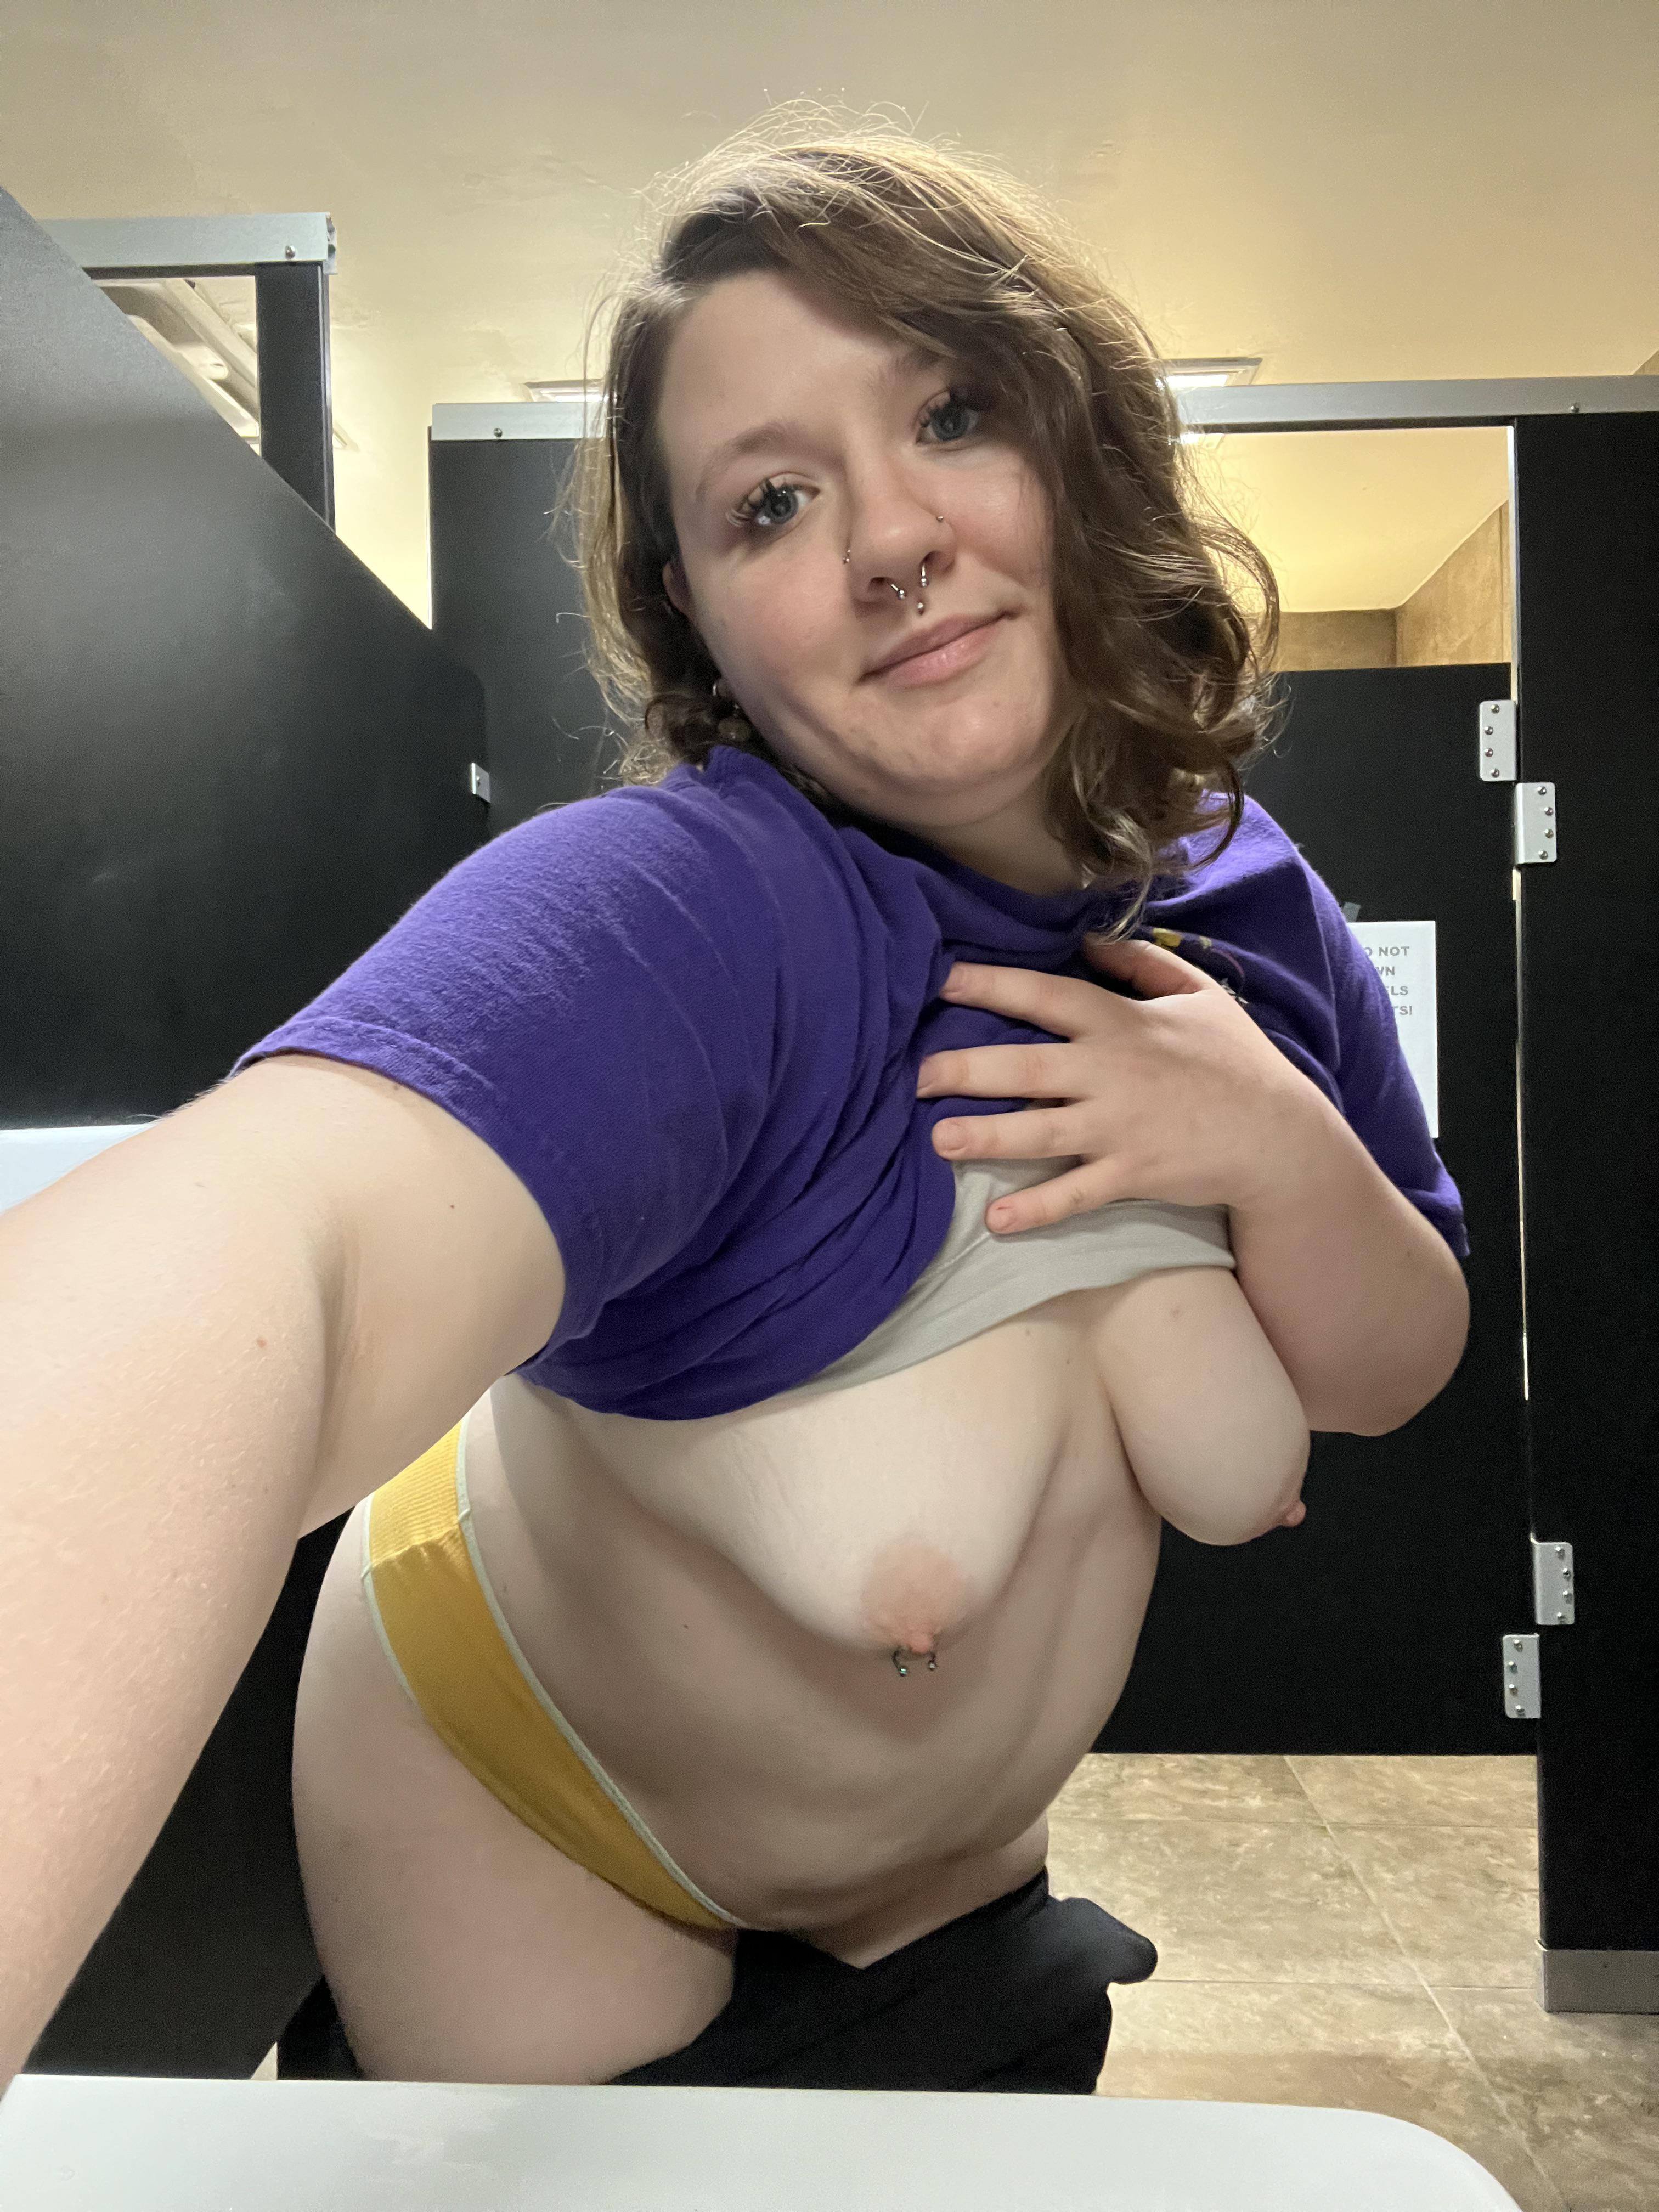 pound me in the stall? Post By Naked Boobs soullessflower on chubby